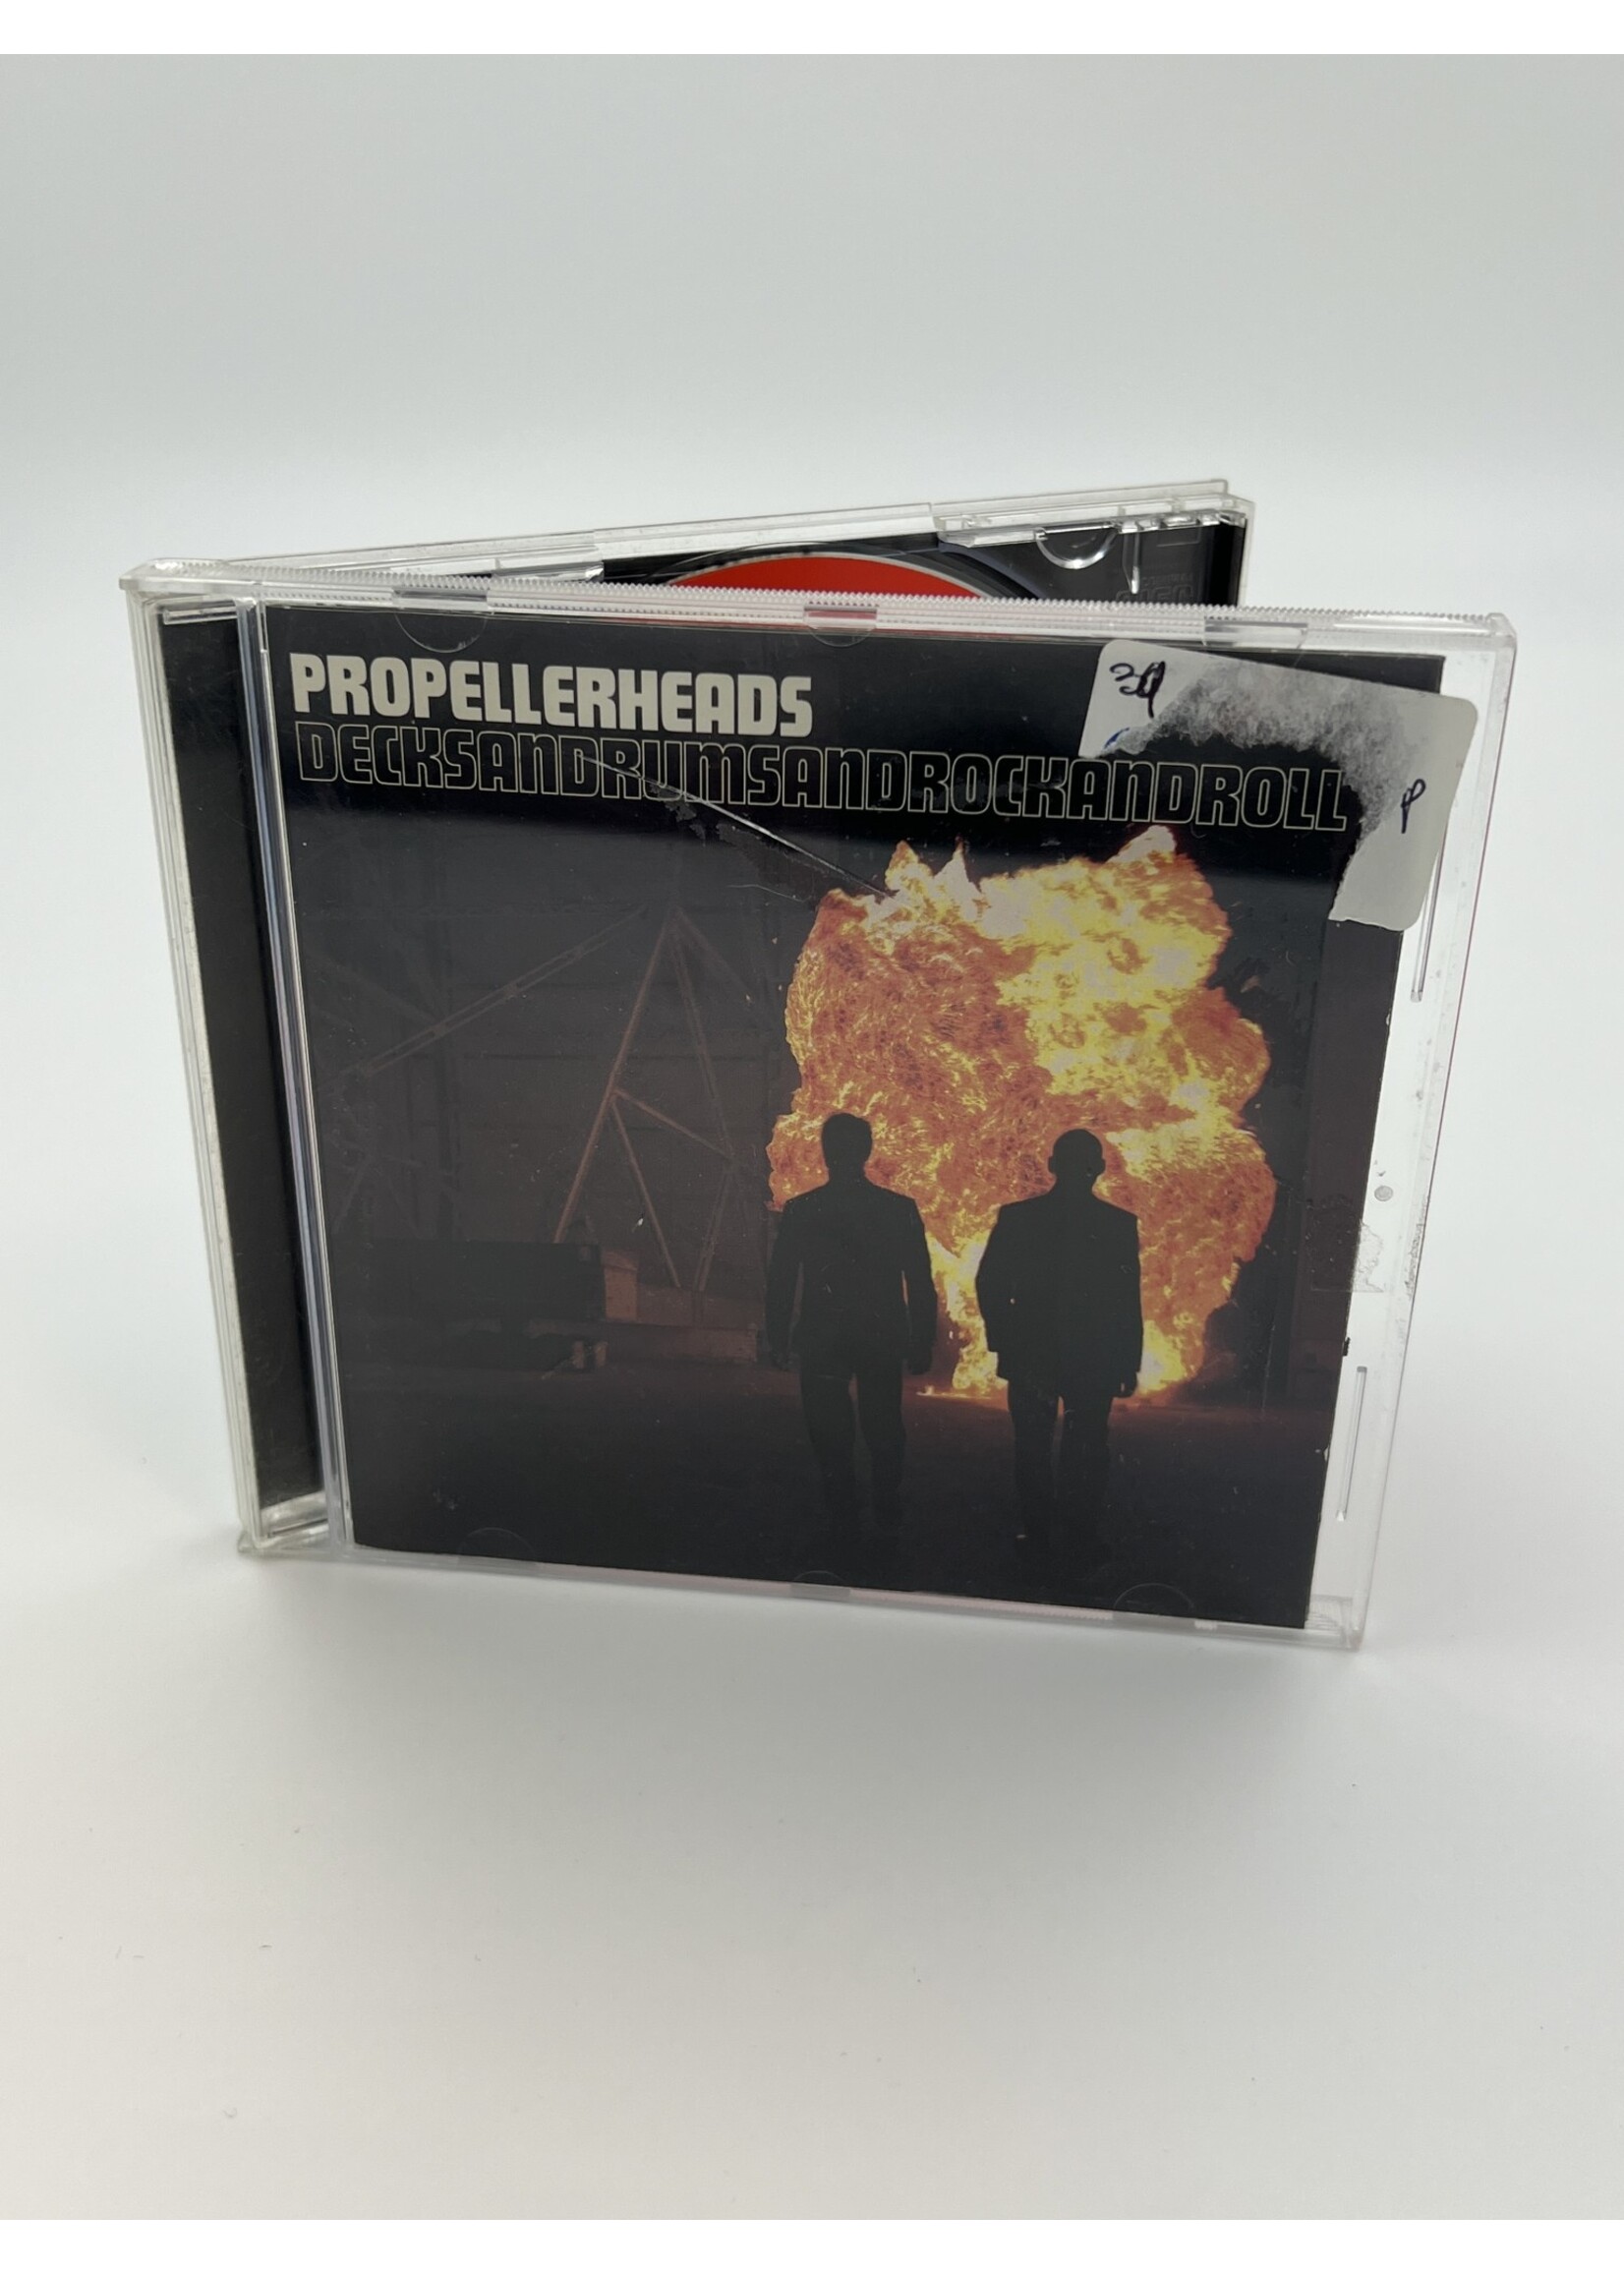 CD   Propellerheads Decks And Drums And Rock And Roll CD